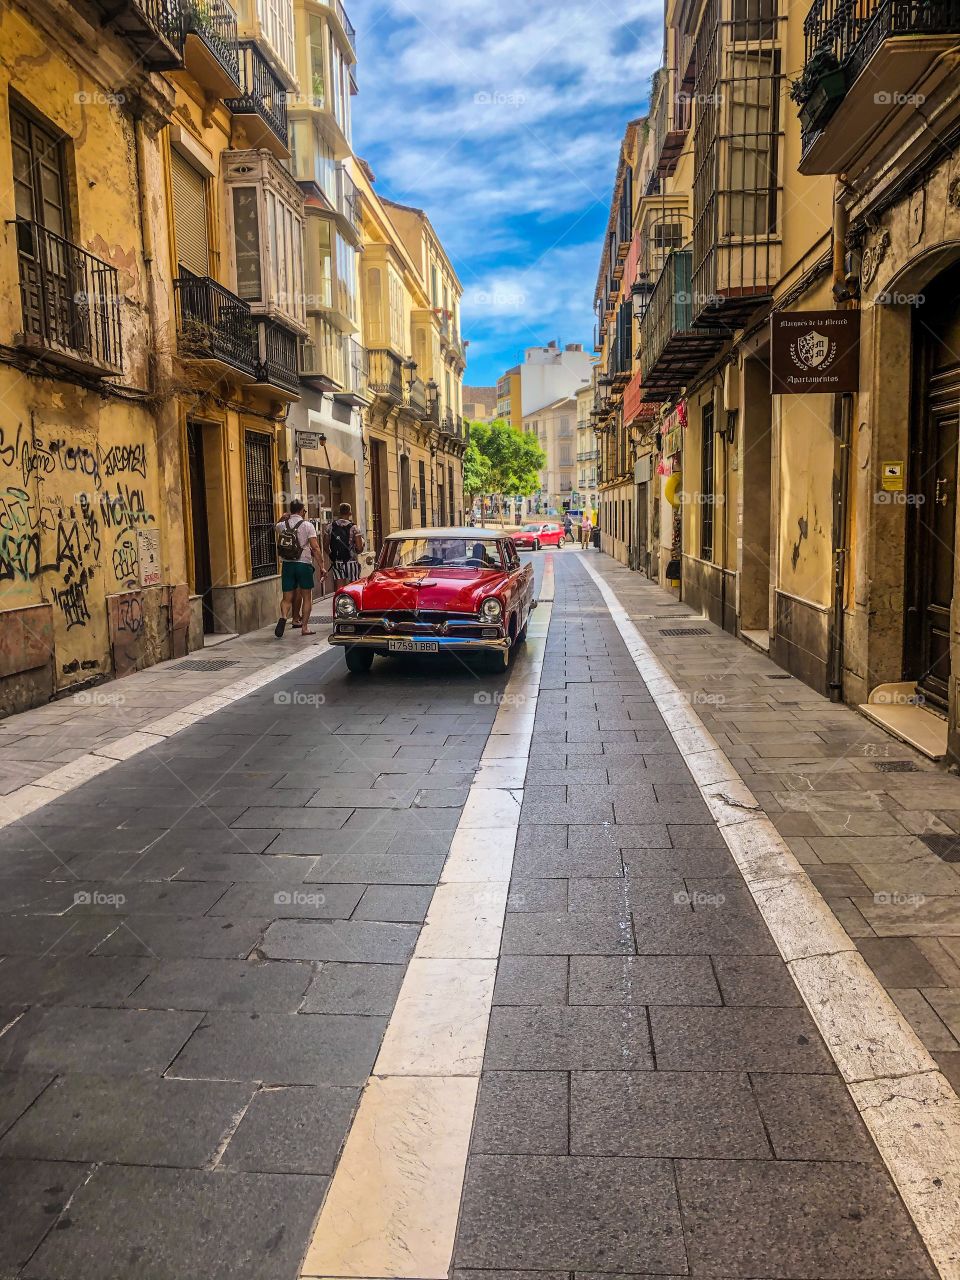 Vintage car in the streets of Malaga!